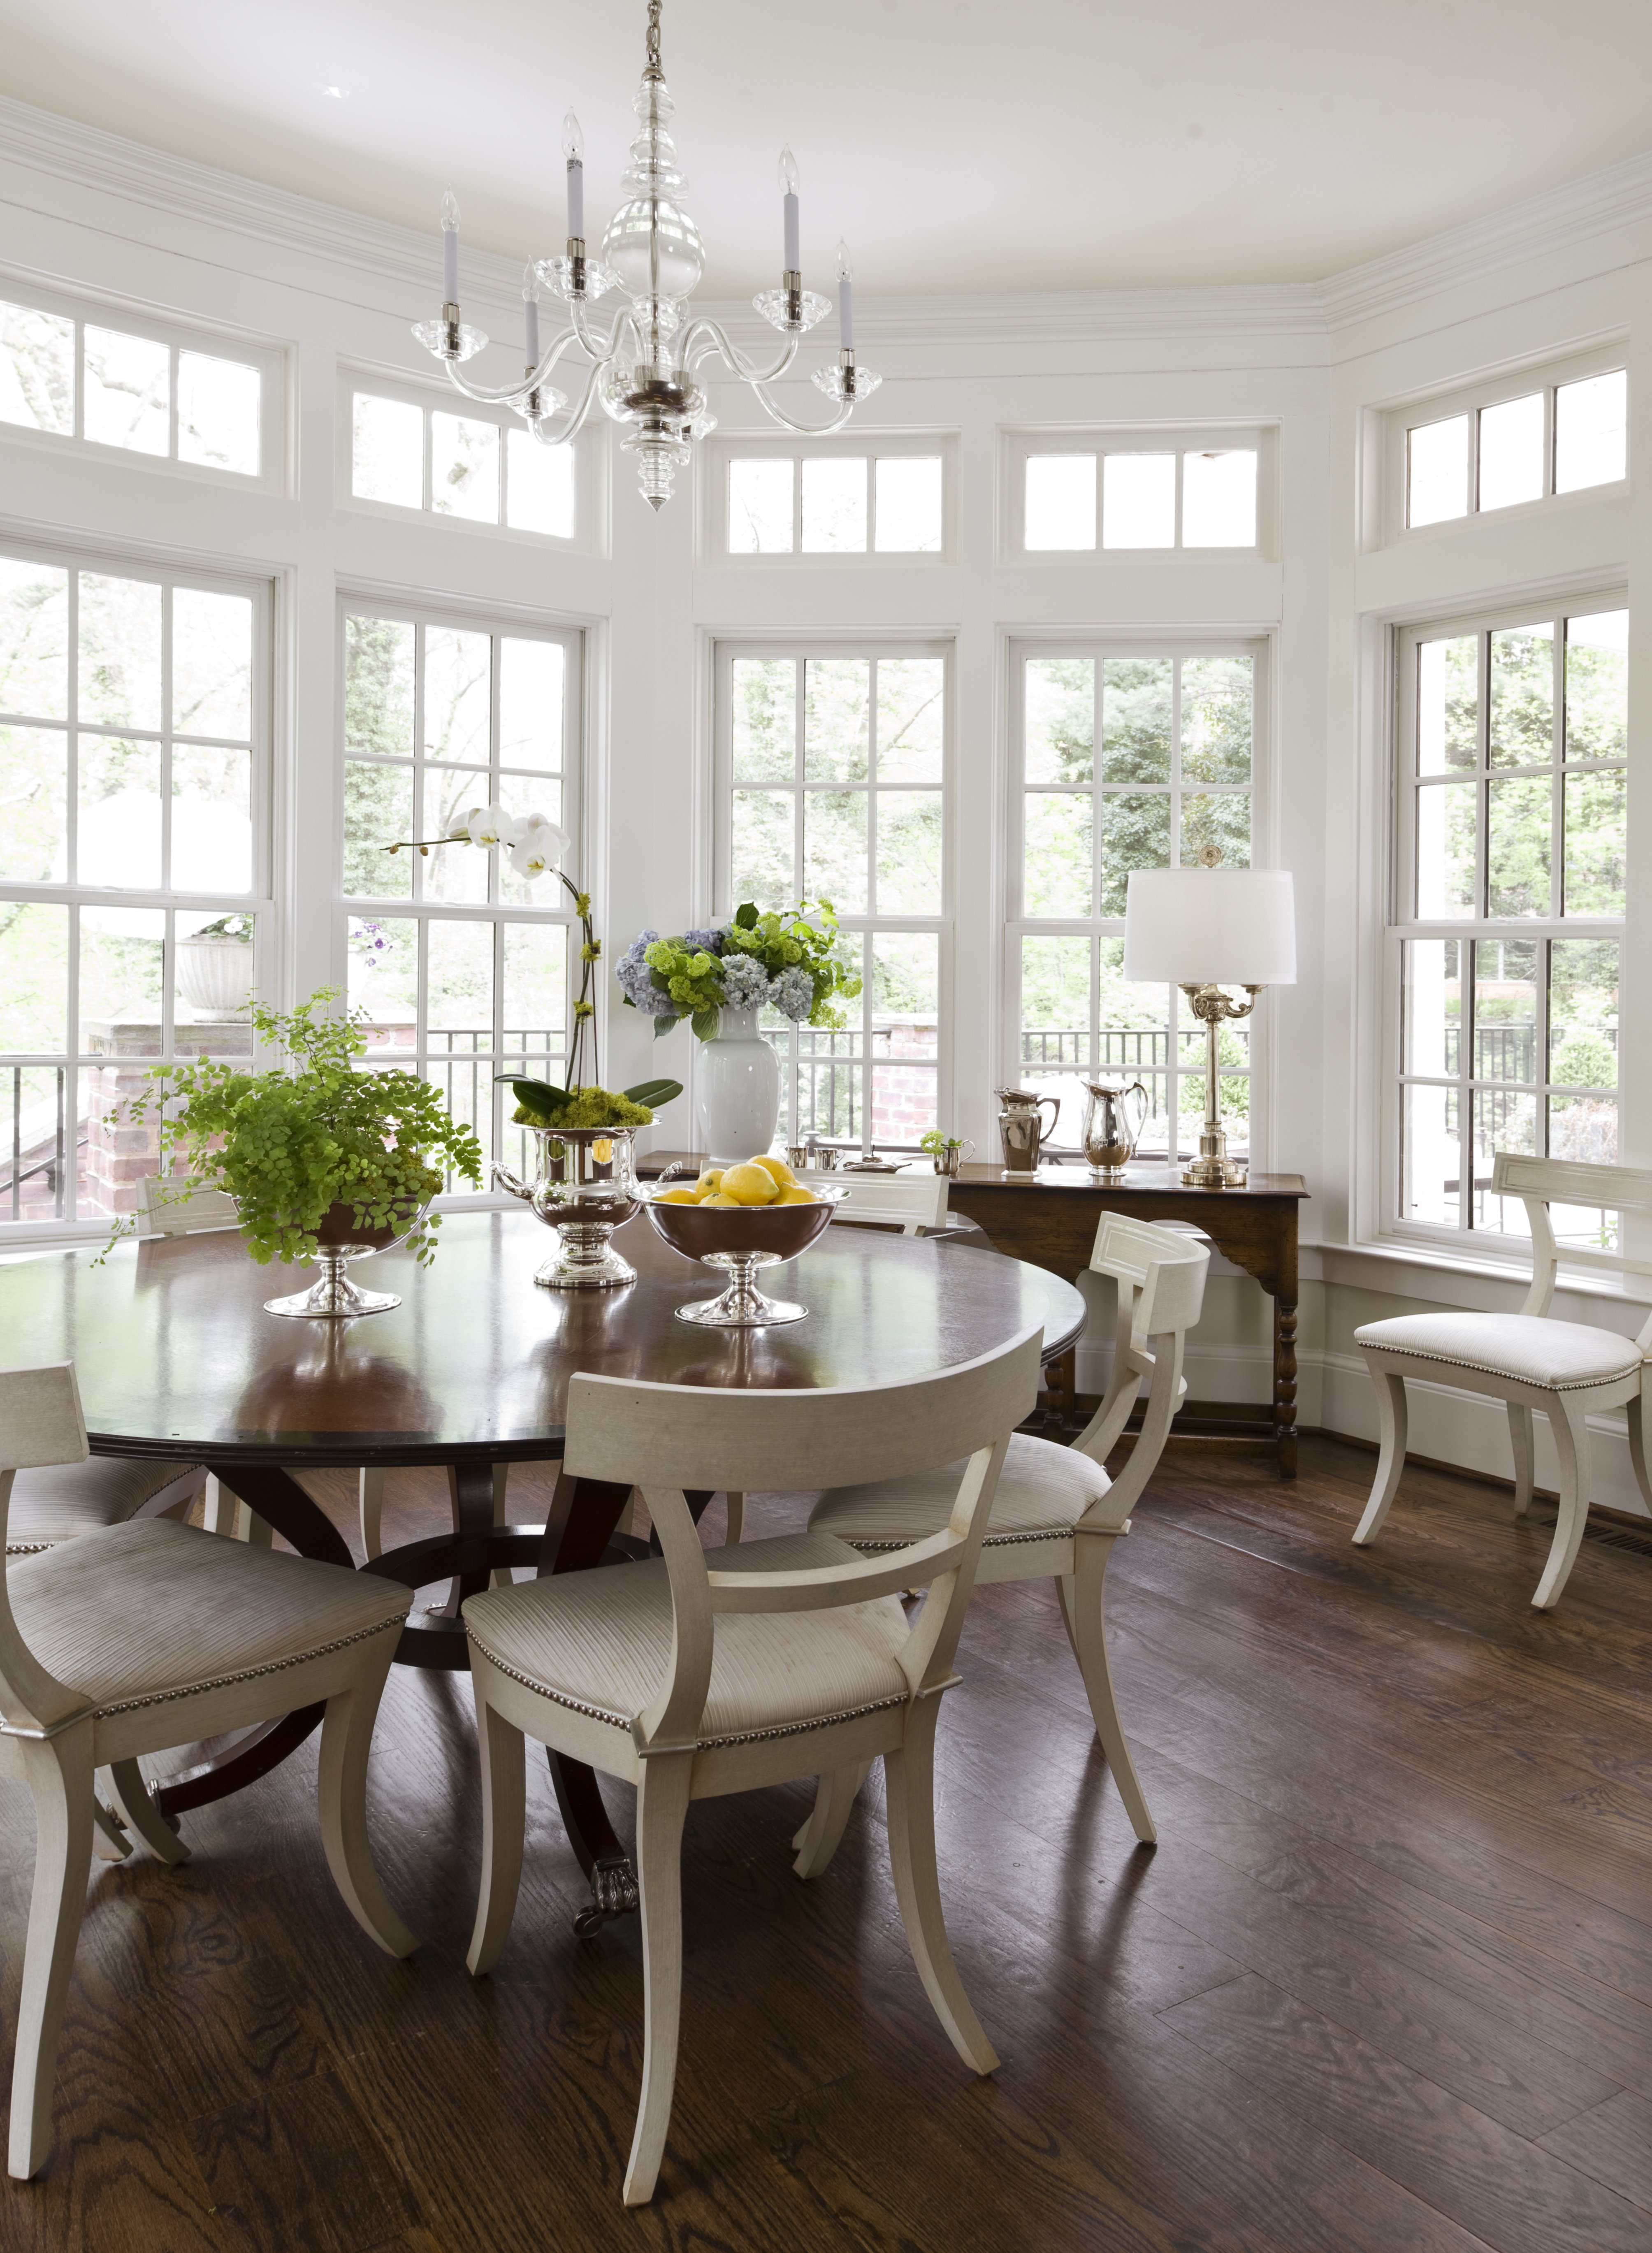 Geoff Tracy and Norah O'Donnell's wooden floor dining area that features a matching round table and beige chairs. | Photo: Getty Images